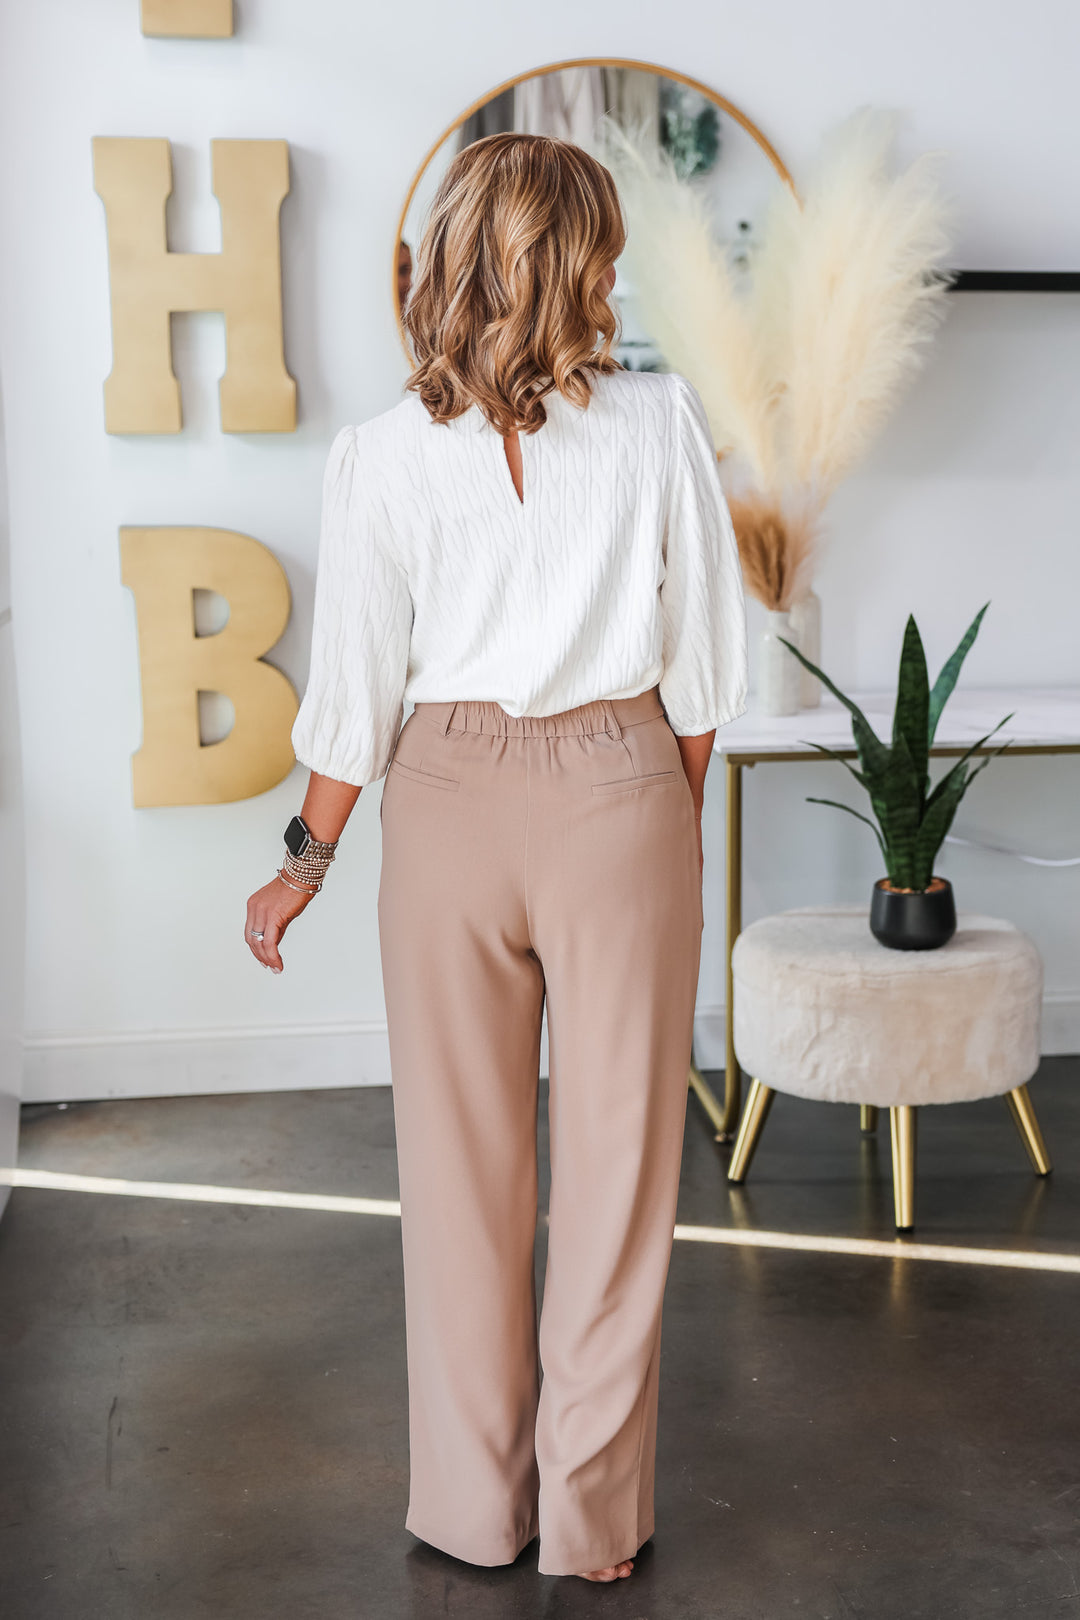 A blonde woman standing in a shop wearing tan dress pants with a wide leg and tab button closure with a white top. She is rear facing.